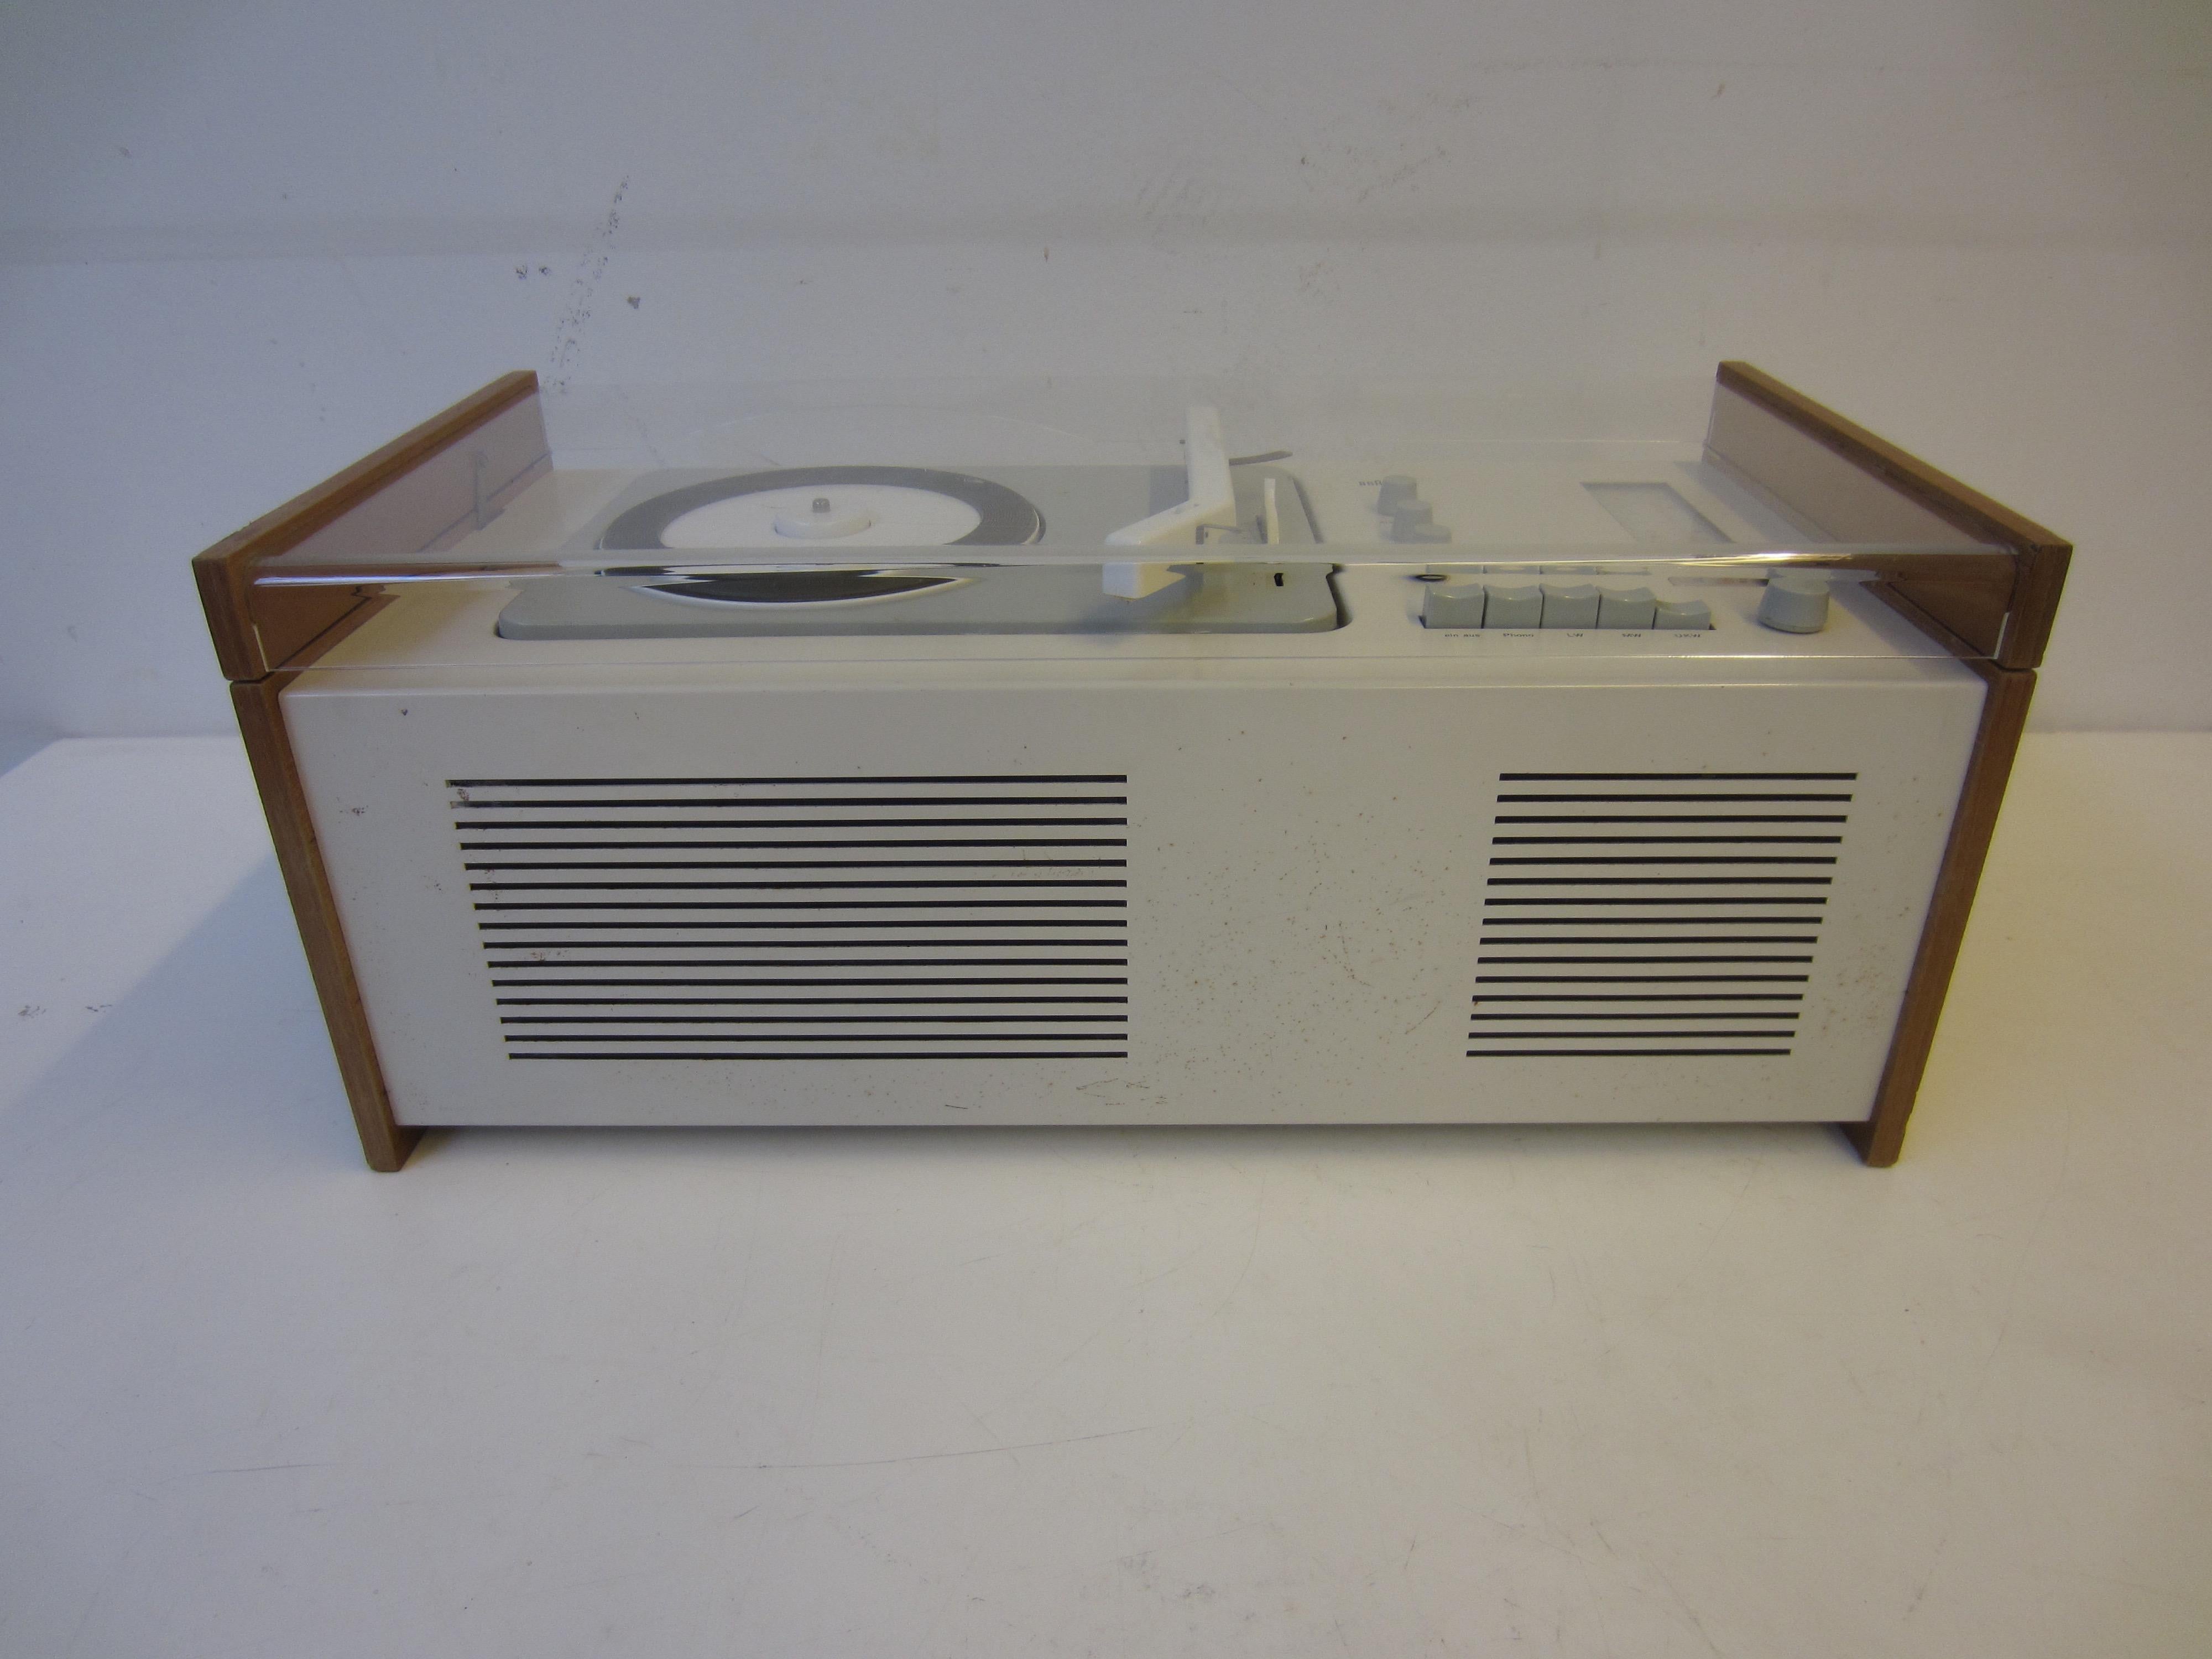 SK61 record player and L1 speaker designed by Dieter Rams and Hans Gugelot for Braun, 1966. The radio-phonograph combination is in excellent cosmetic condition, and full working order. Some oxidation marks on the front and side wood panels.
It has